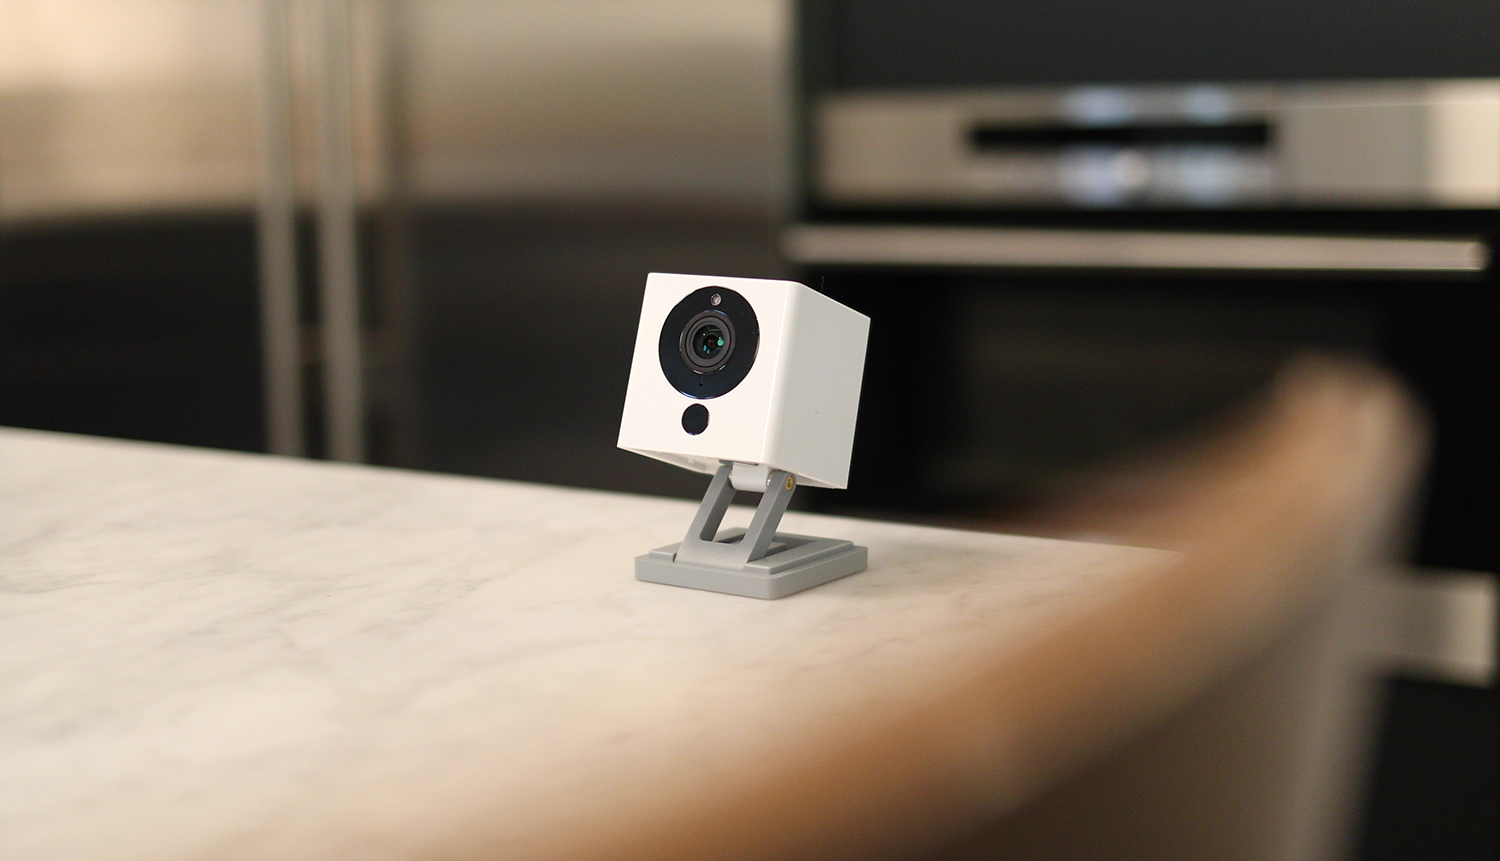 bestselling-wyze-home-security-cameras-are-down-to-20-at-amazon